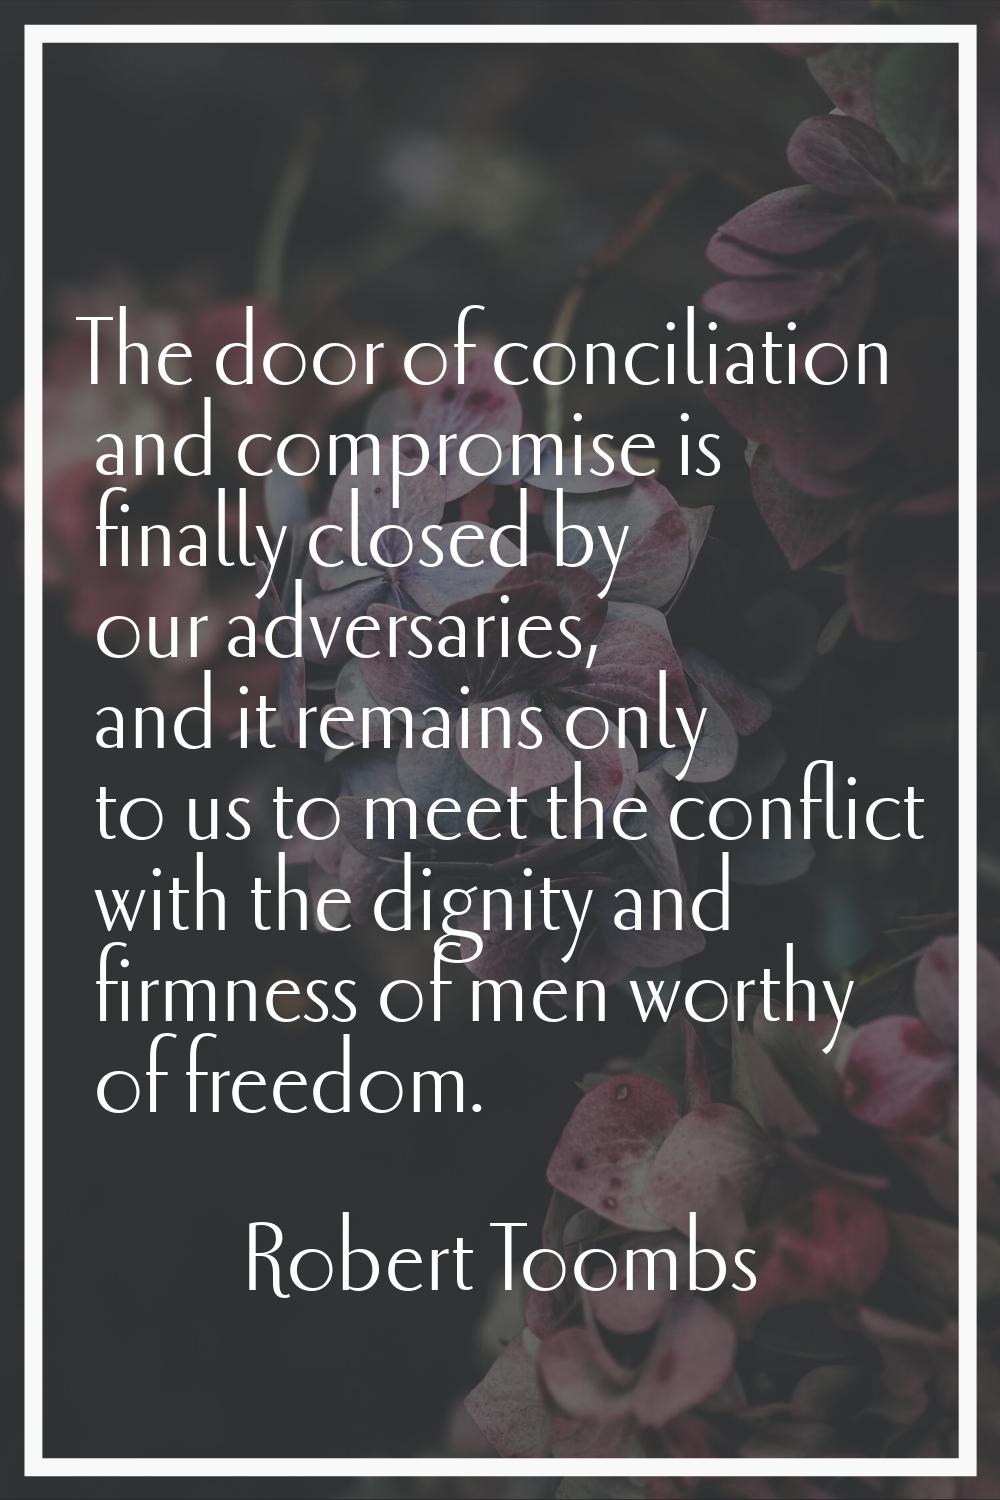 The door of conciliation and compromise is finally closed by our adversaries, and it remains only t